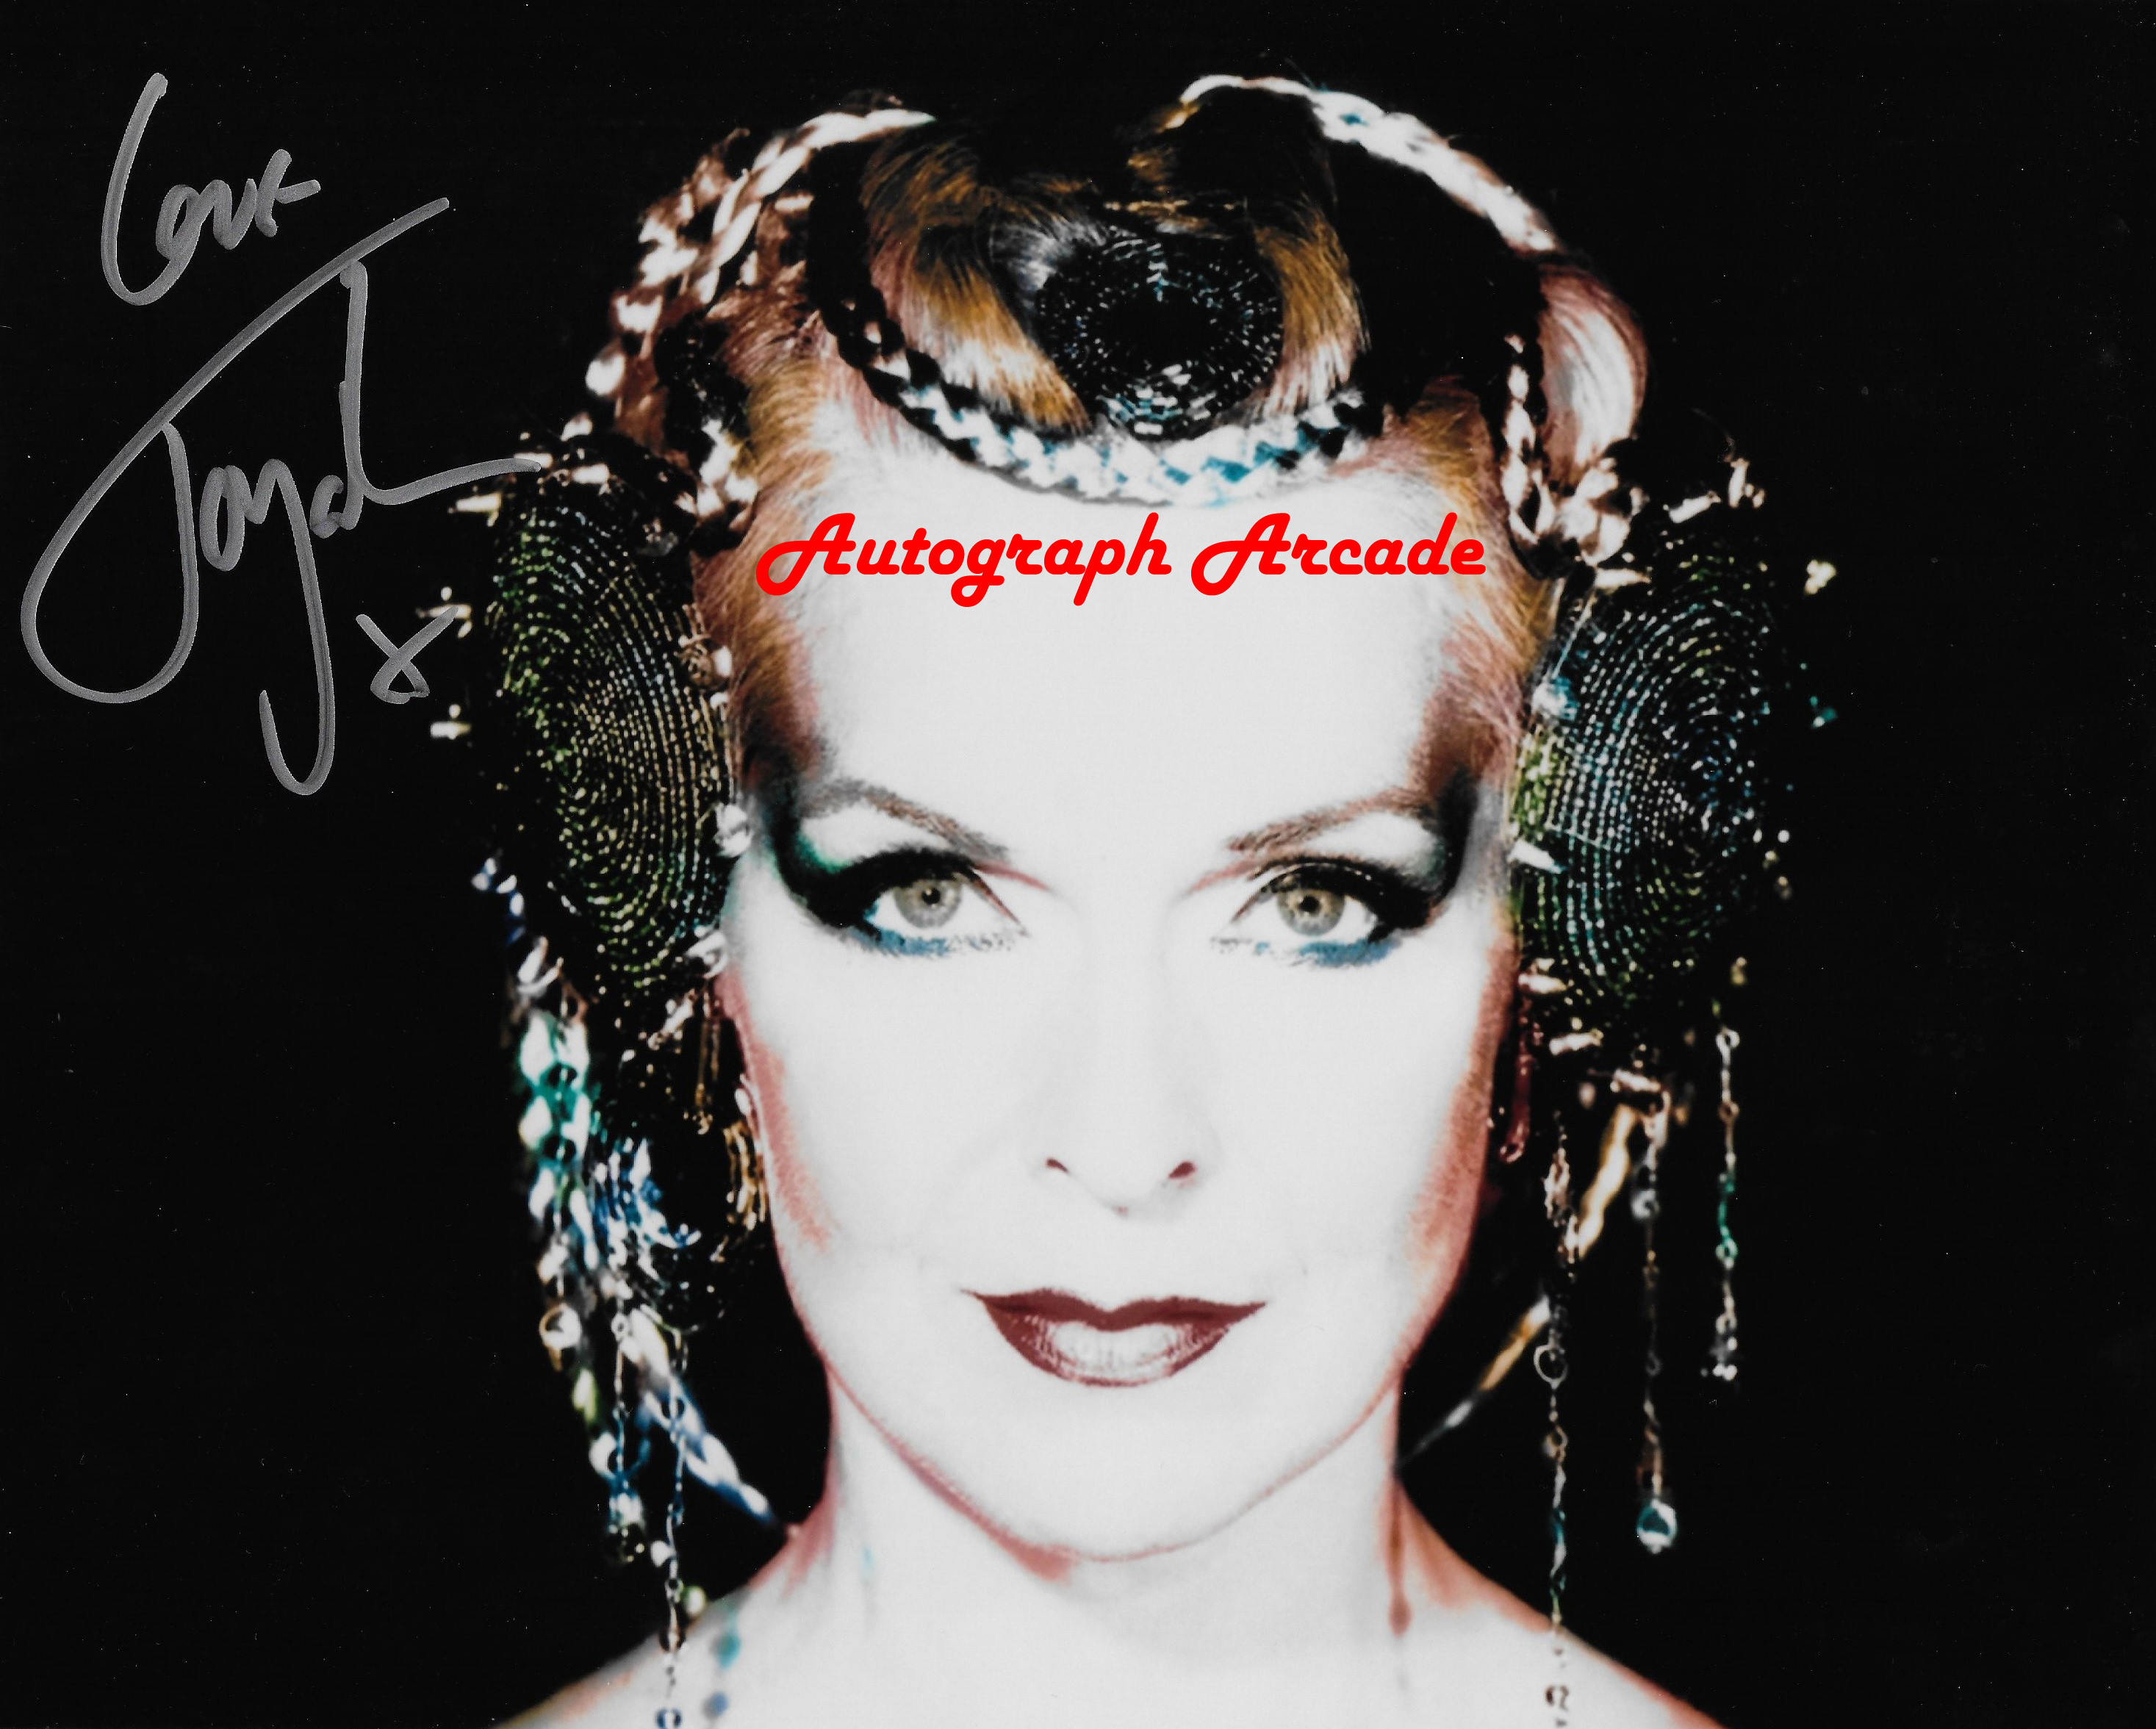 Photo 10" x 8" Toyah in person signed photo J4M 